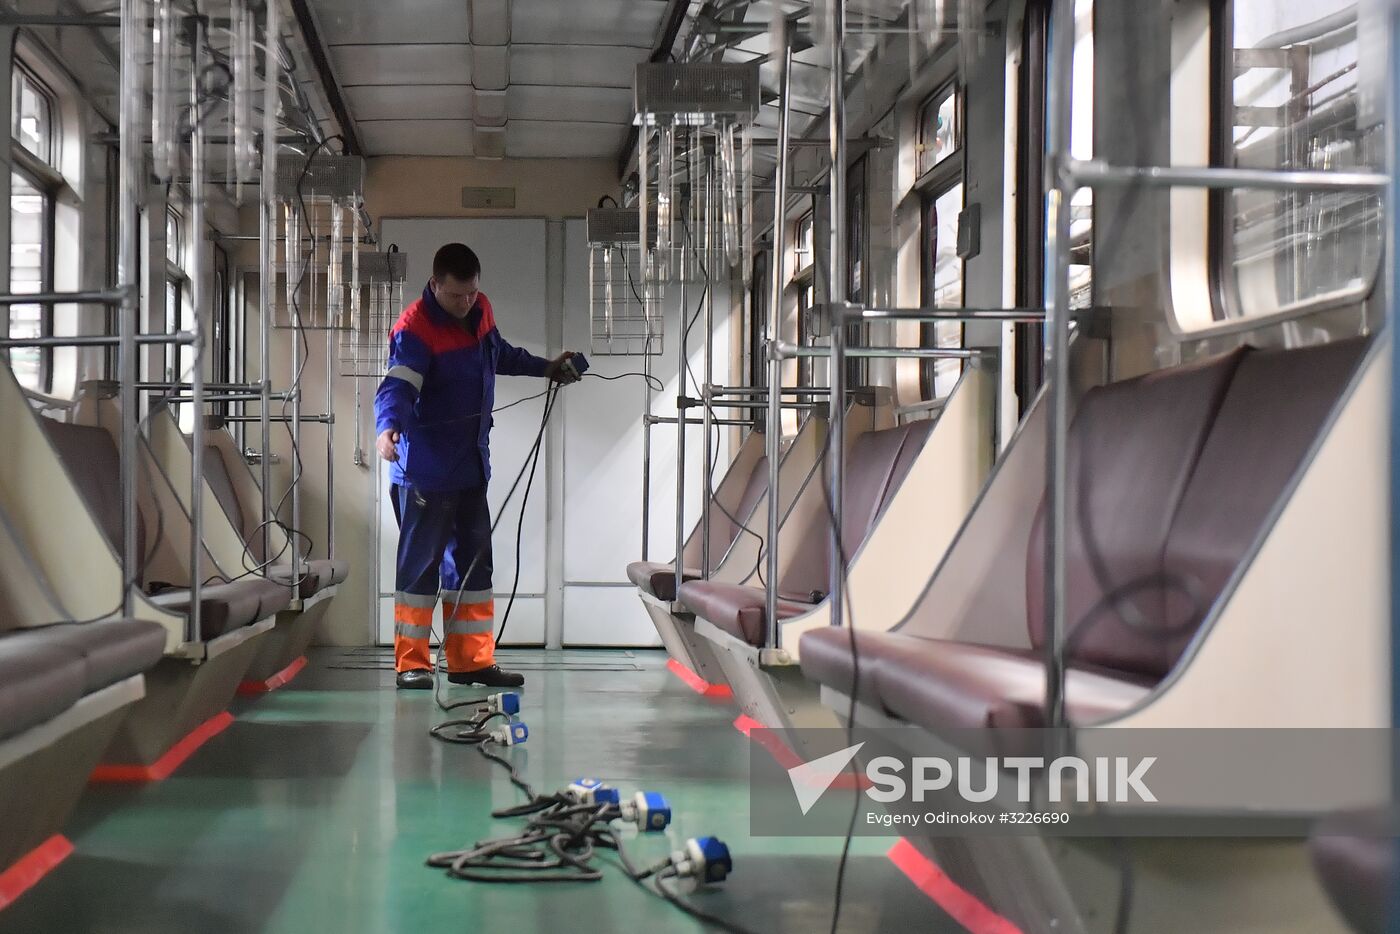 Metro carriage disinfection